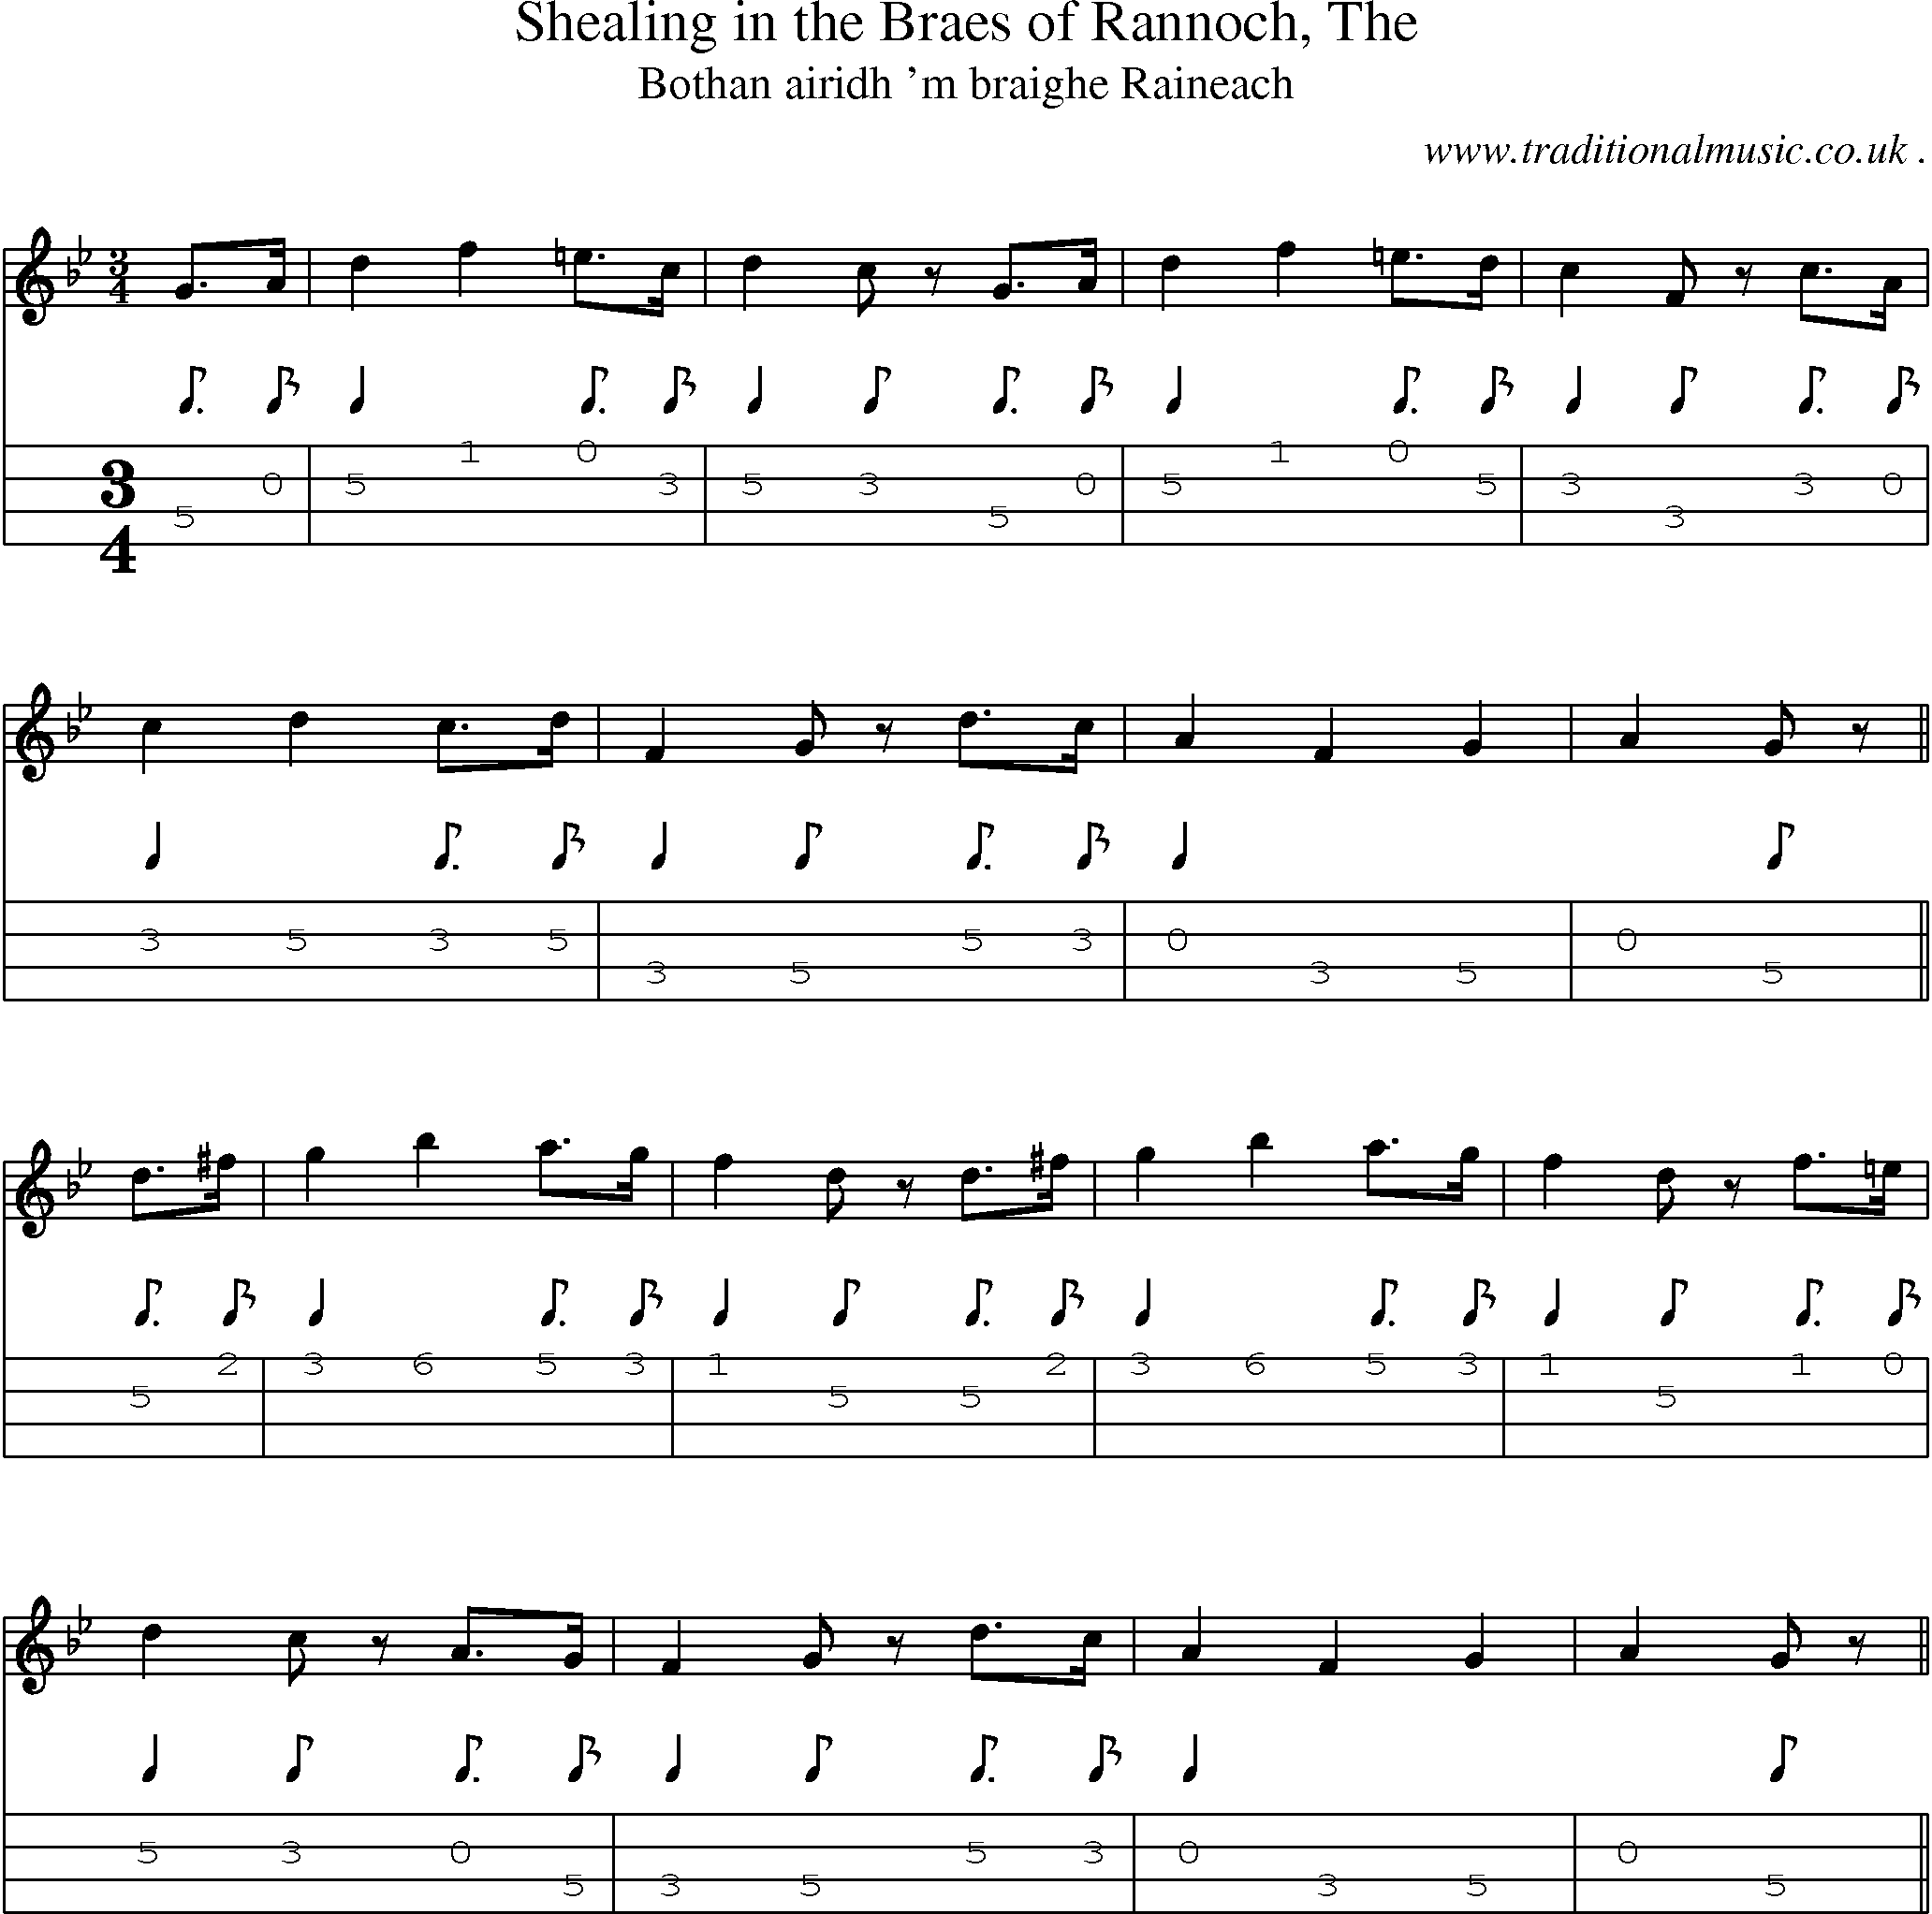 Sheet-music  score, Chords and Mandolin Tabs for Shealing In The Braes Of Rannoch The